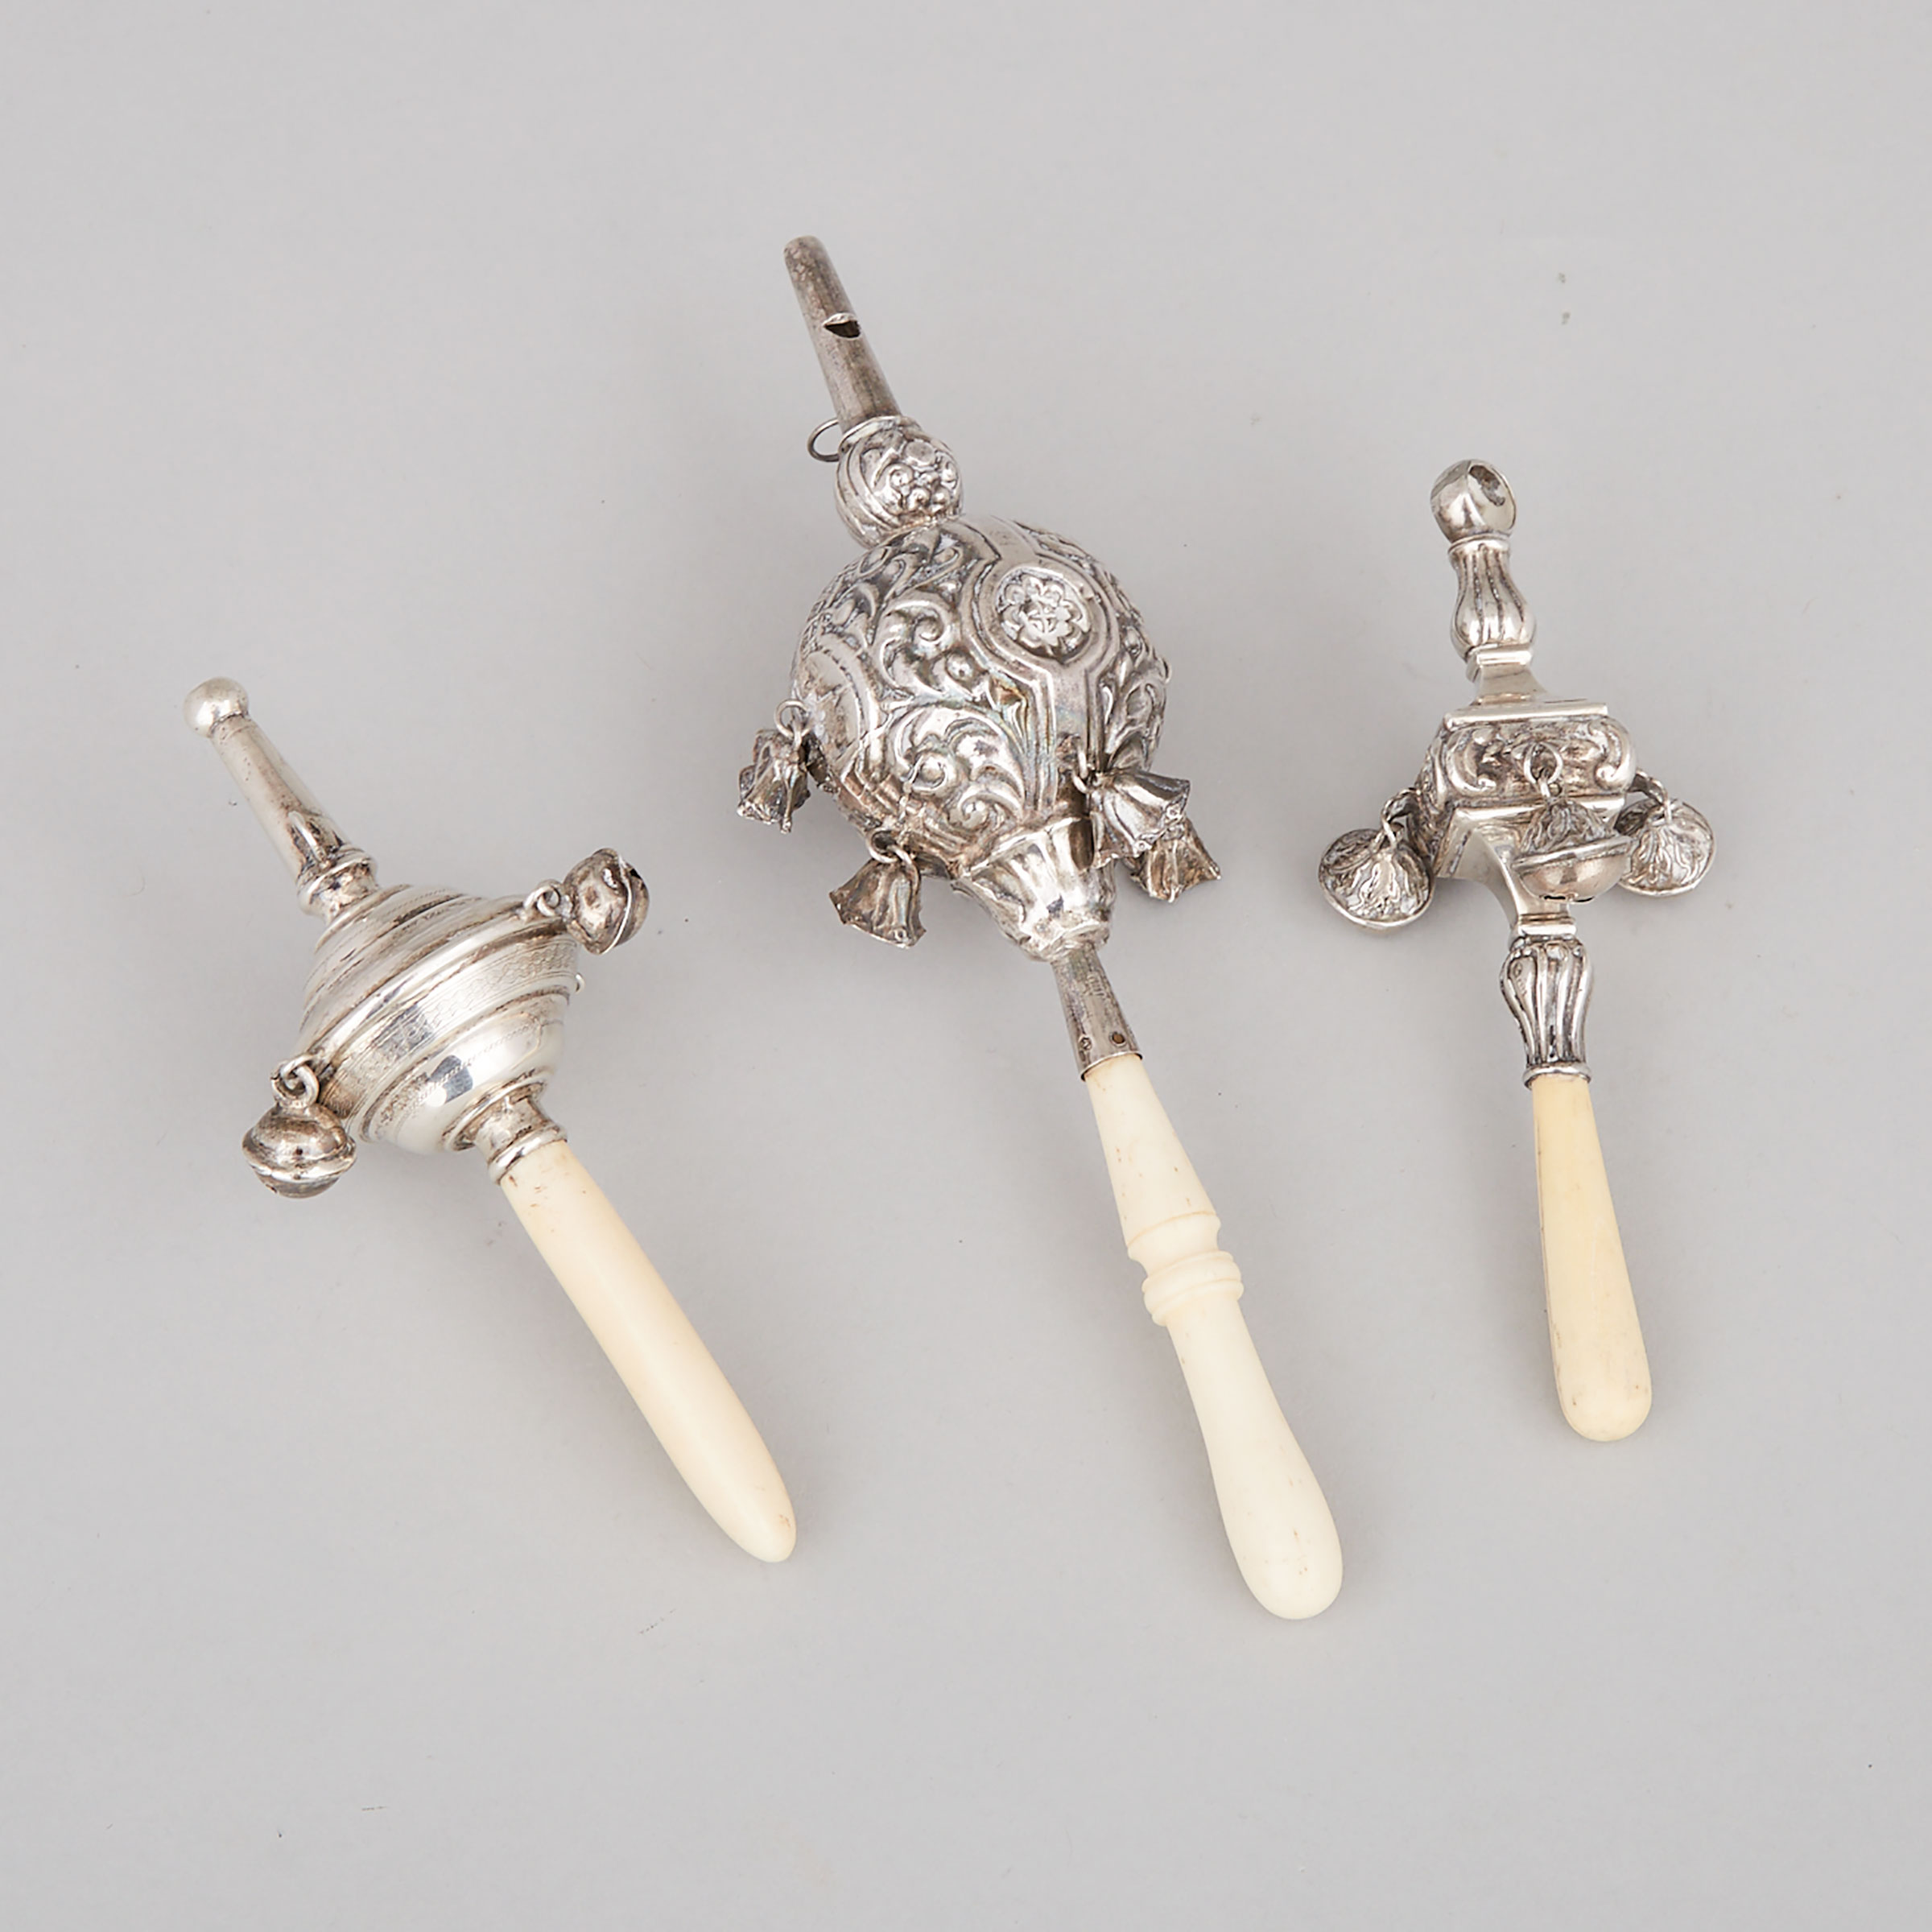 Three English and Continental Silver Child’s Rattles and Whistles, late 19th/20th century